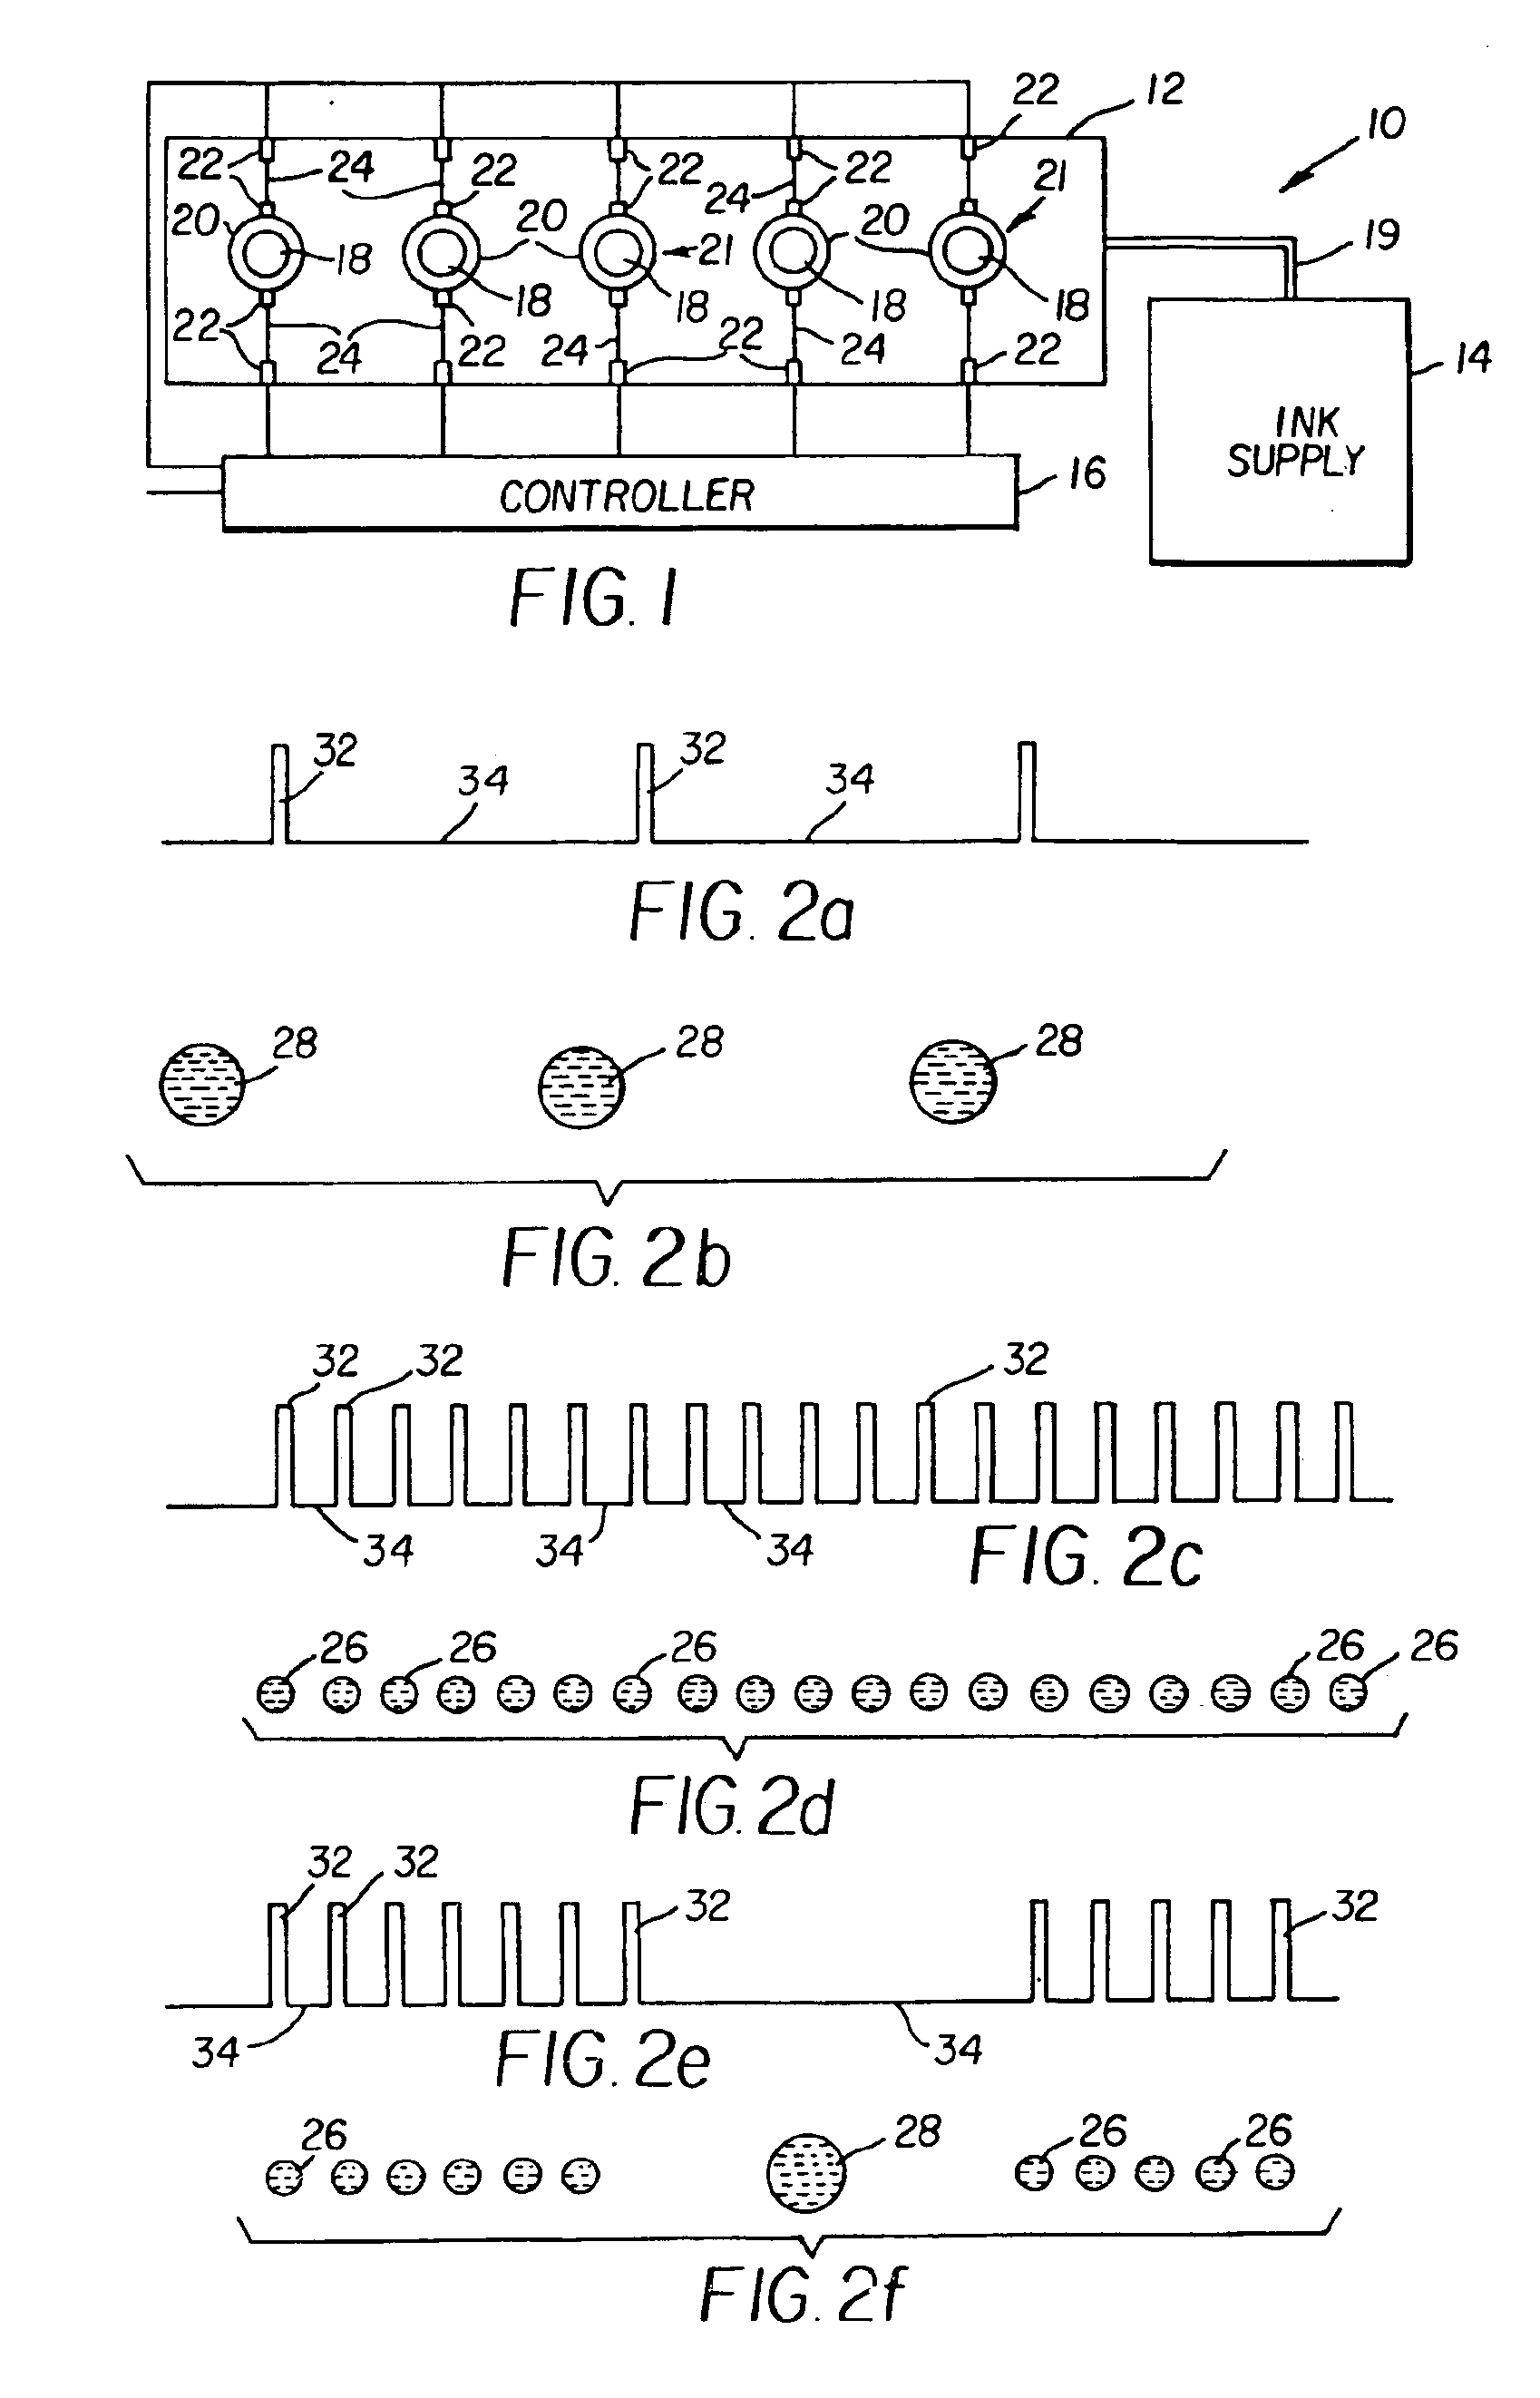 Continuous ink-jet printing apparatus having an improved droplet deflector and catcher